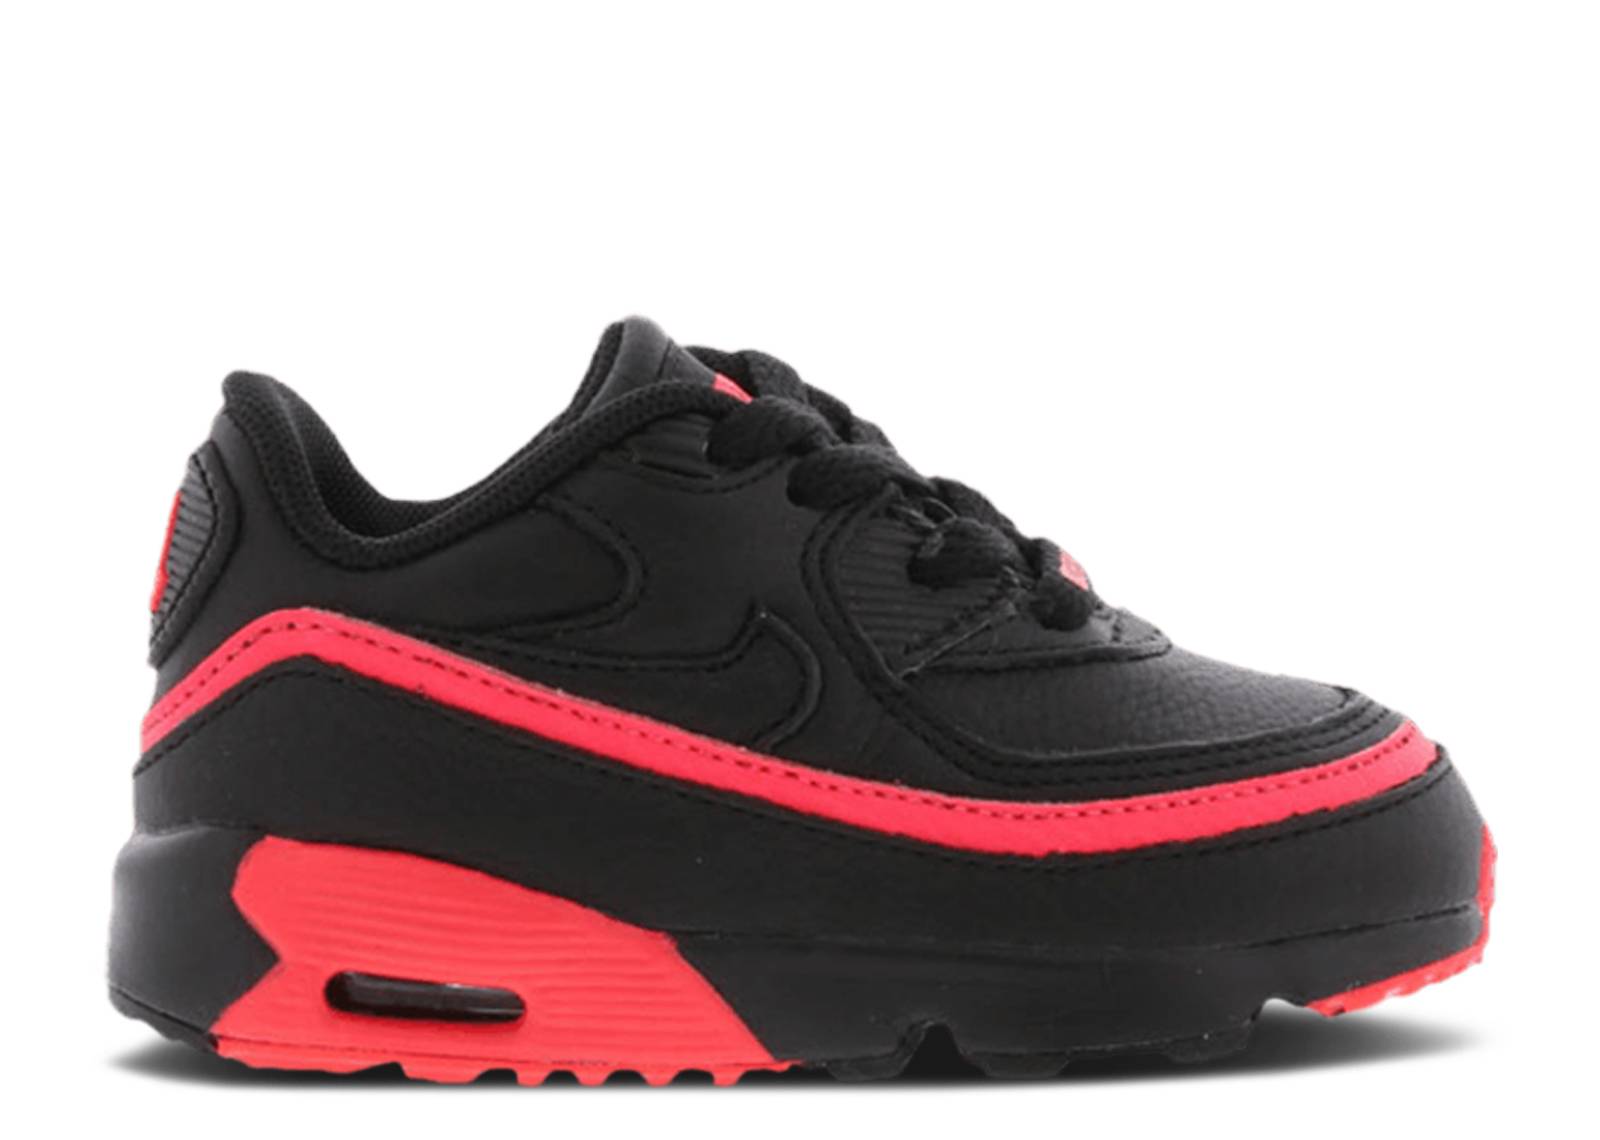 Undefeated x Air Max 90 TD 'Black Solar Red'